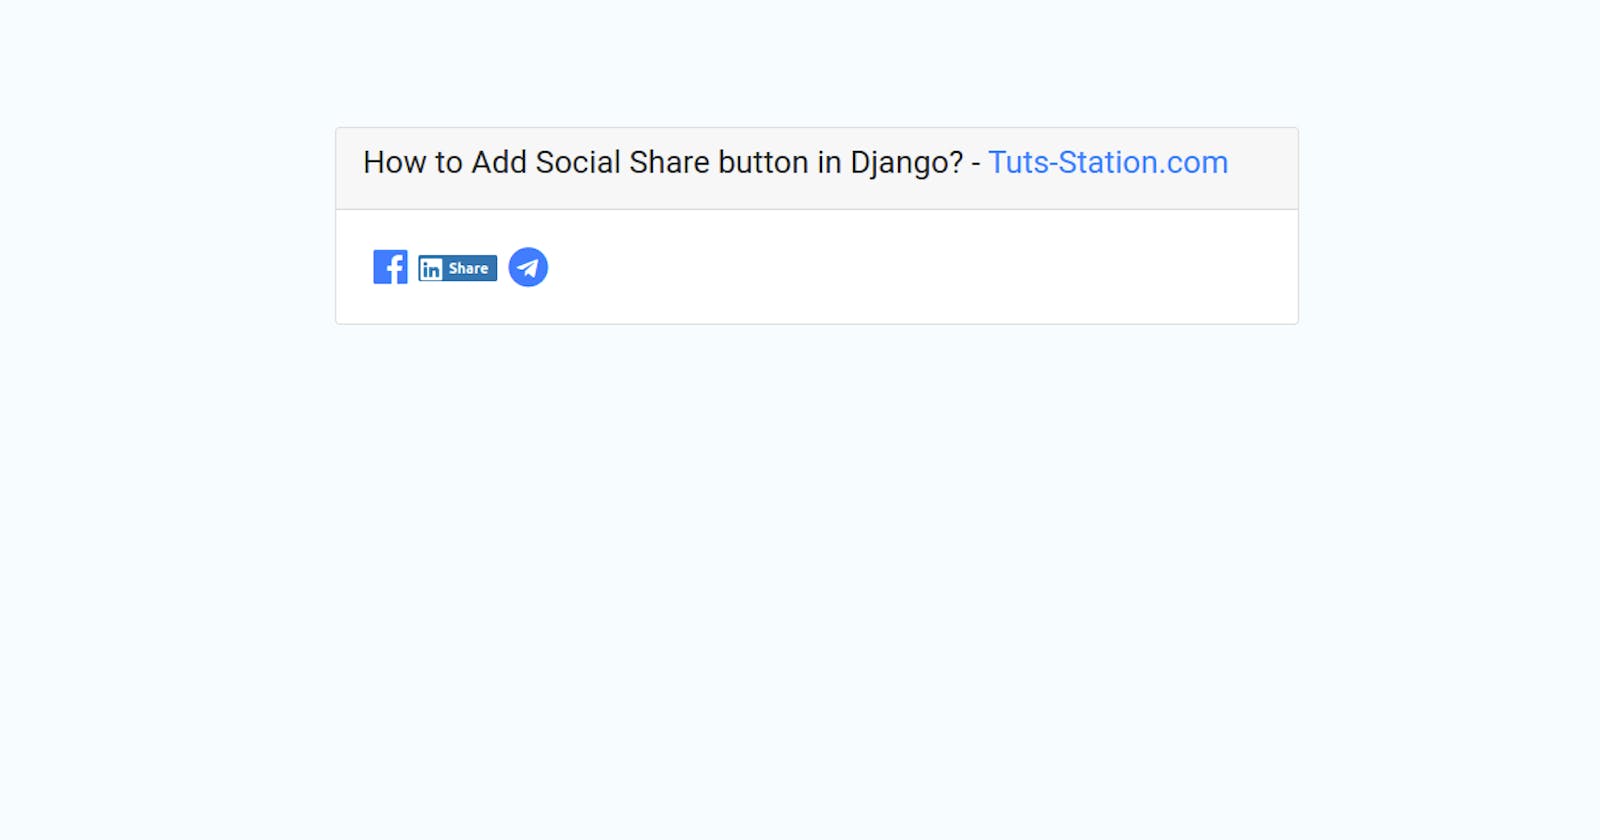 How to Integrate Social Share Button in Django?